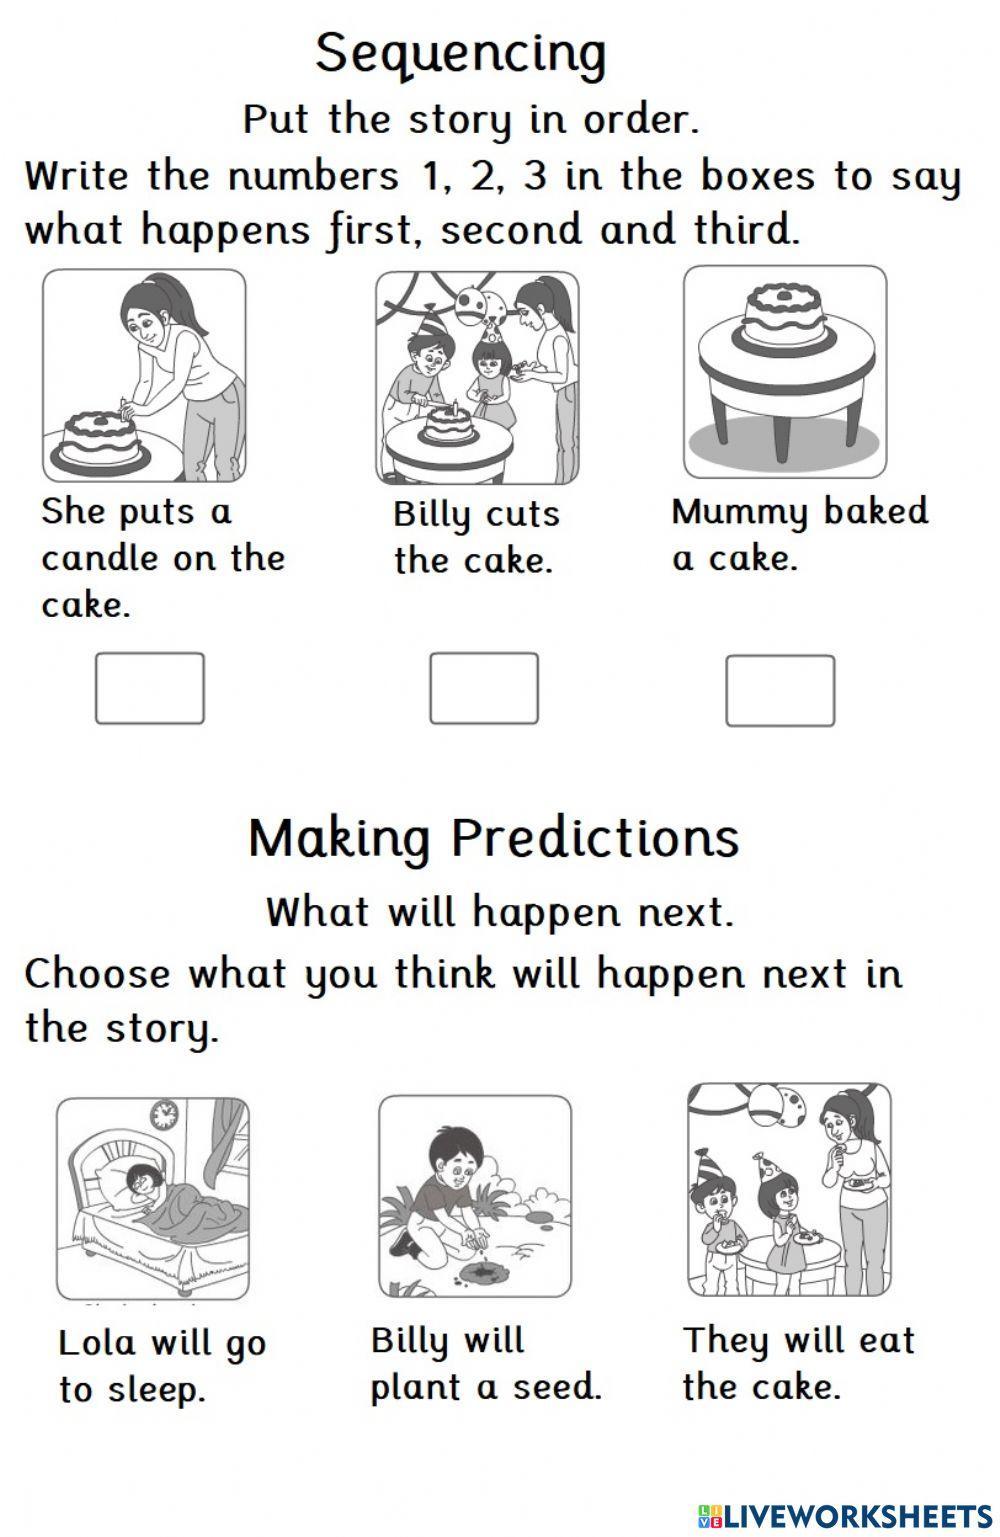 Sequencing and Making Predictions